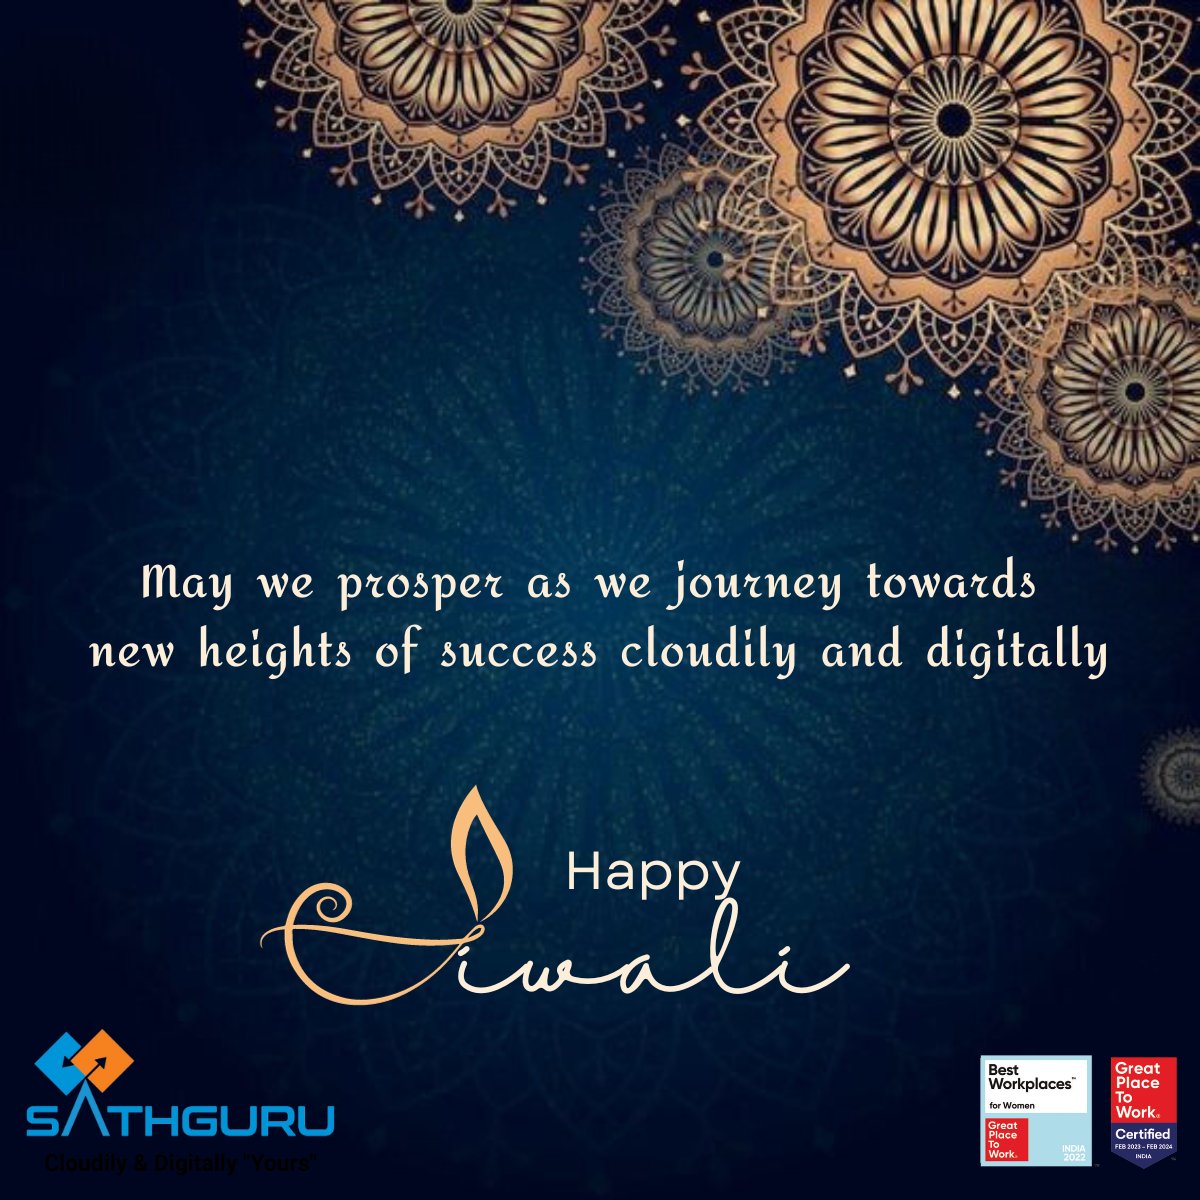 Wishing one and all a happy and safe Diwali

#sathgurumc #sathgurulife #sathgurusoft #sathgurusoftwareproducts #diwali2023